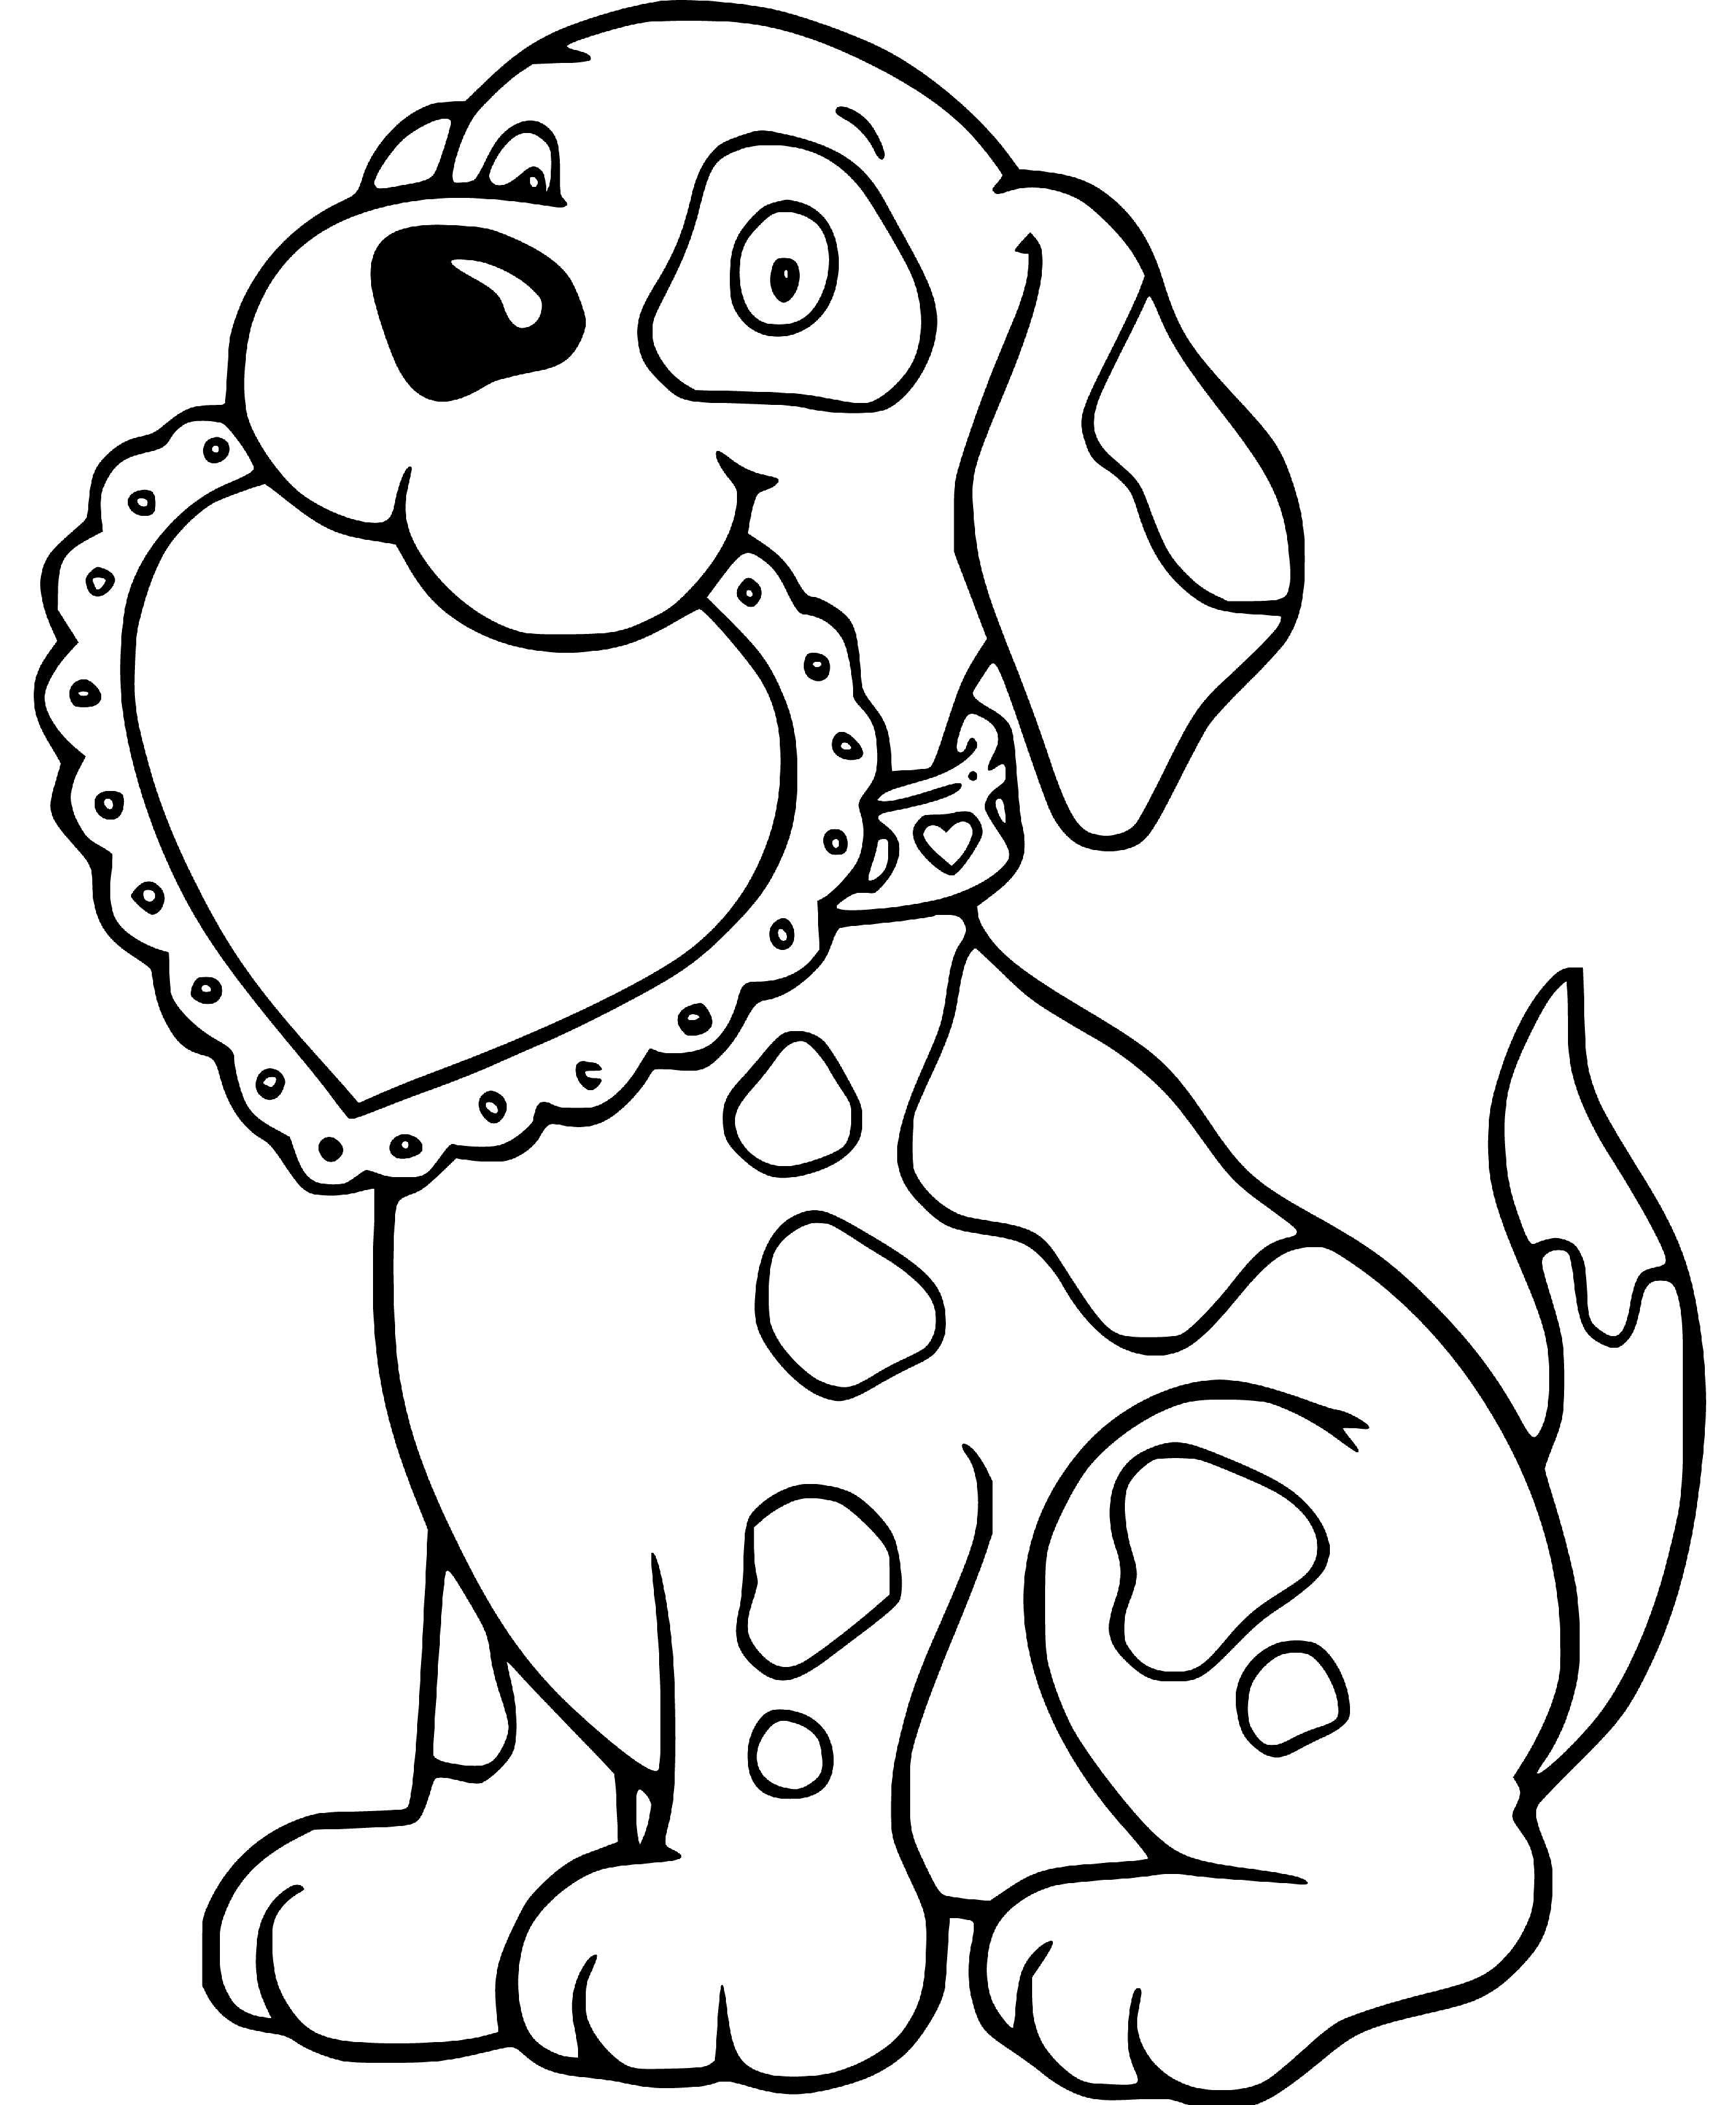 Printable Puppy holding mirror Coloring Page for kids.